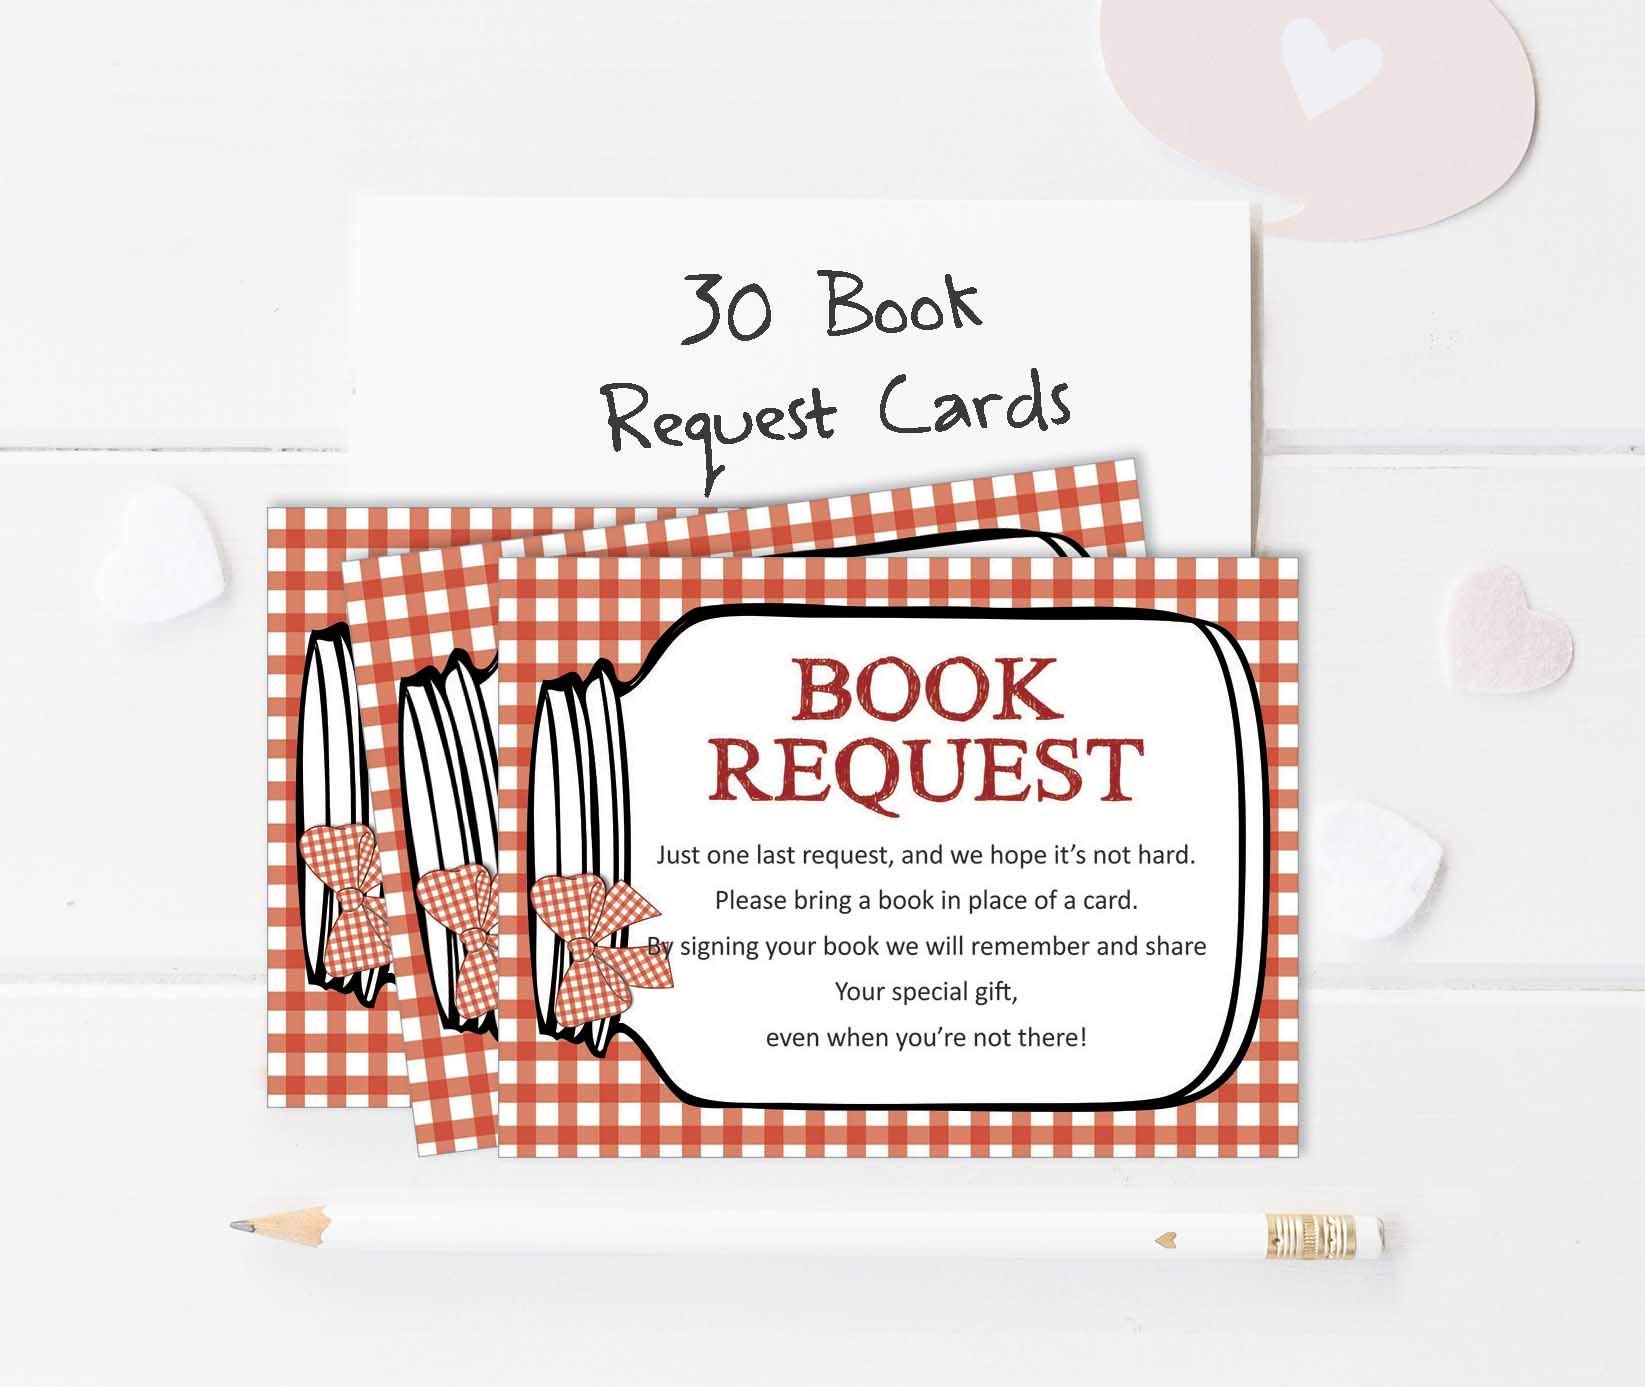 Inkdotpot 30 BBQ Gender Neutral Baby Shower Book Request Cards Bring A Book Instead of A Card Baby Shower Invitations Inserts Games